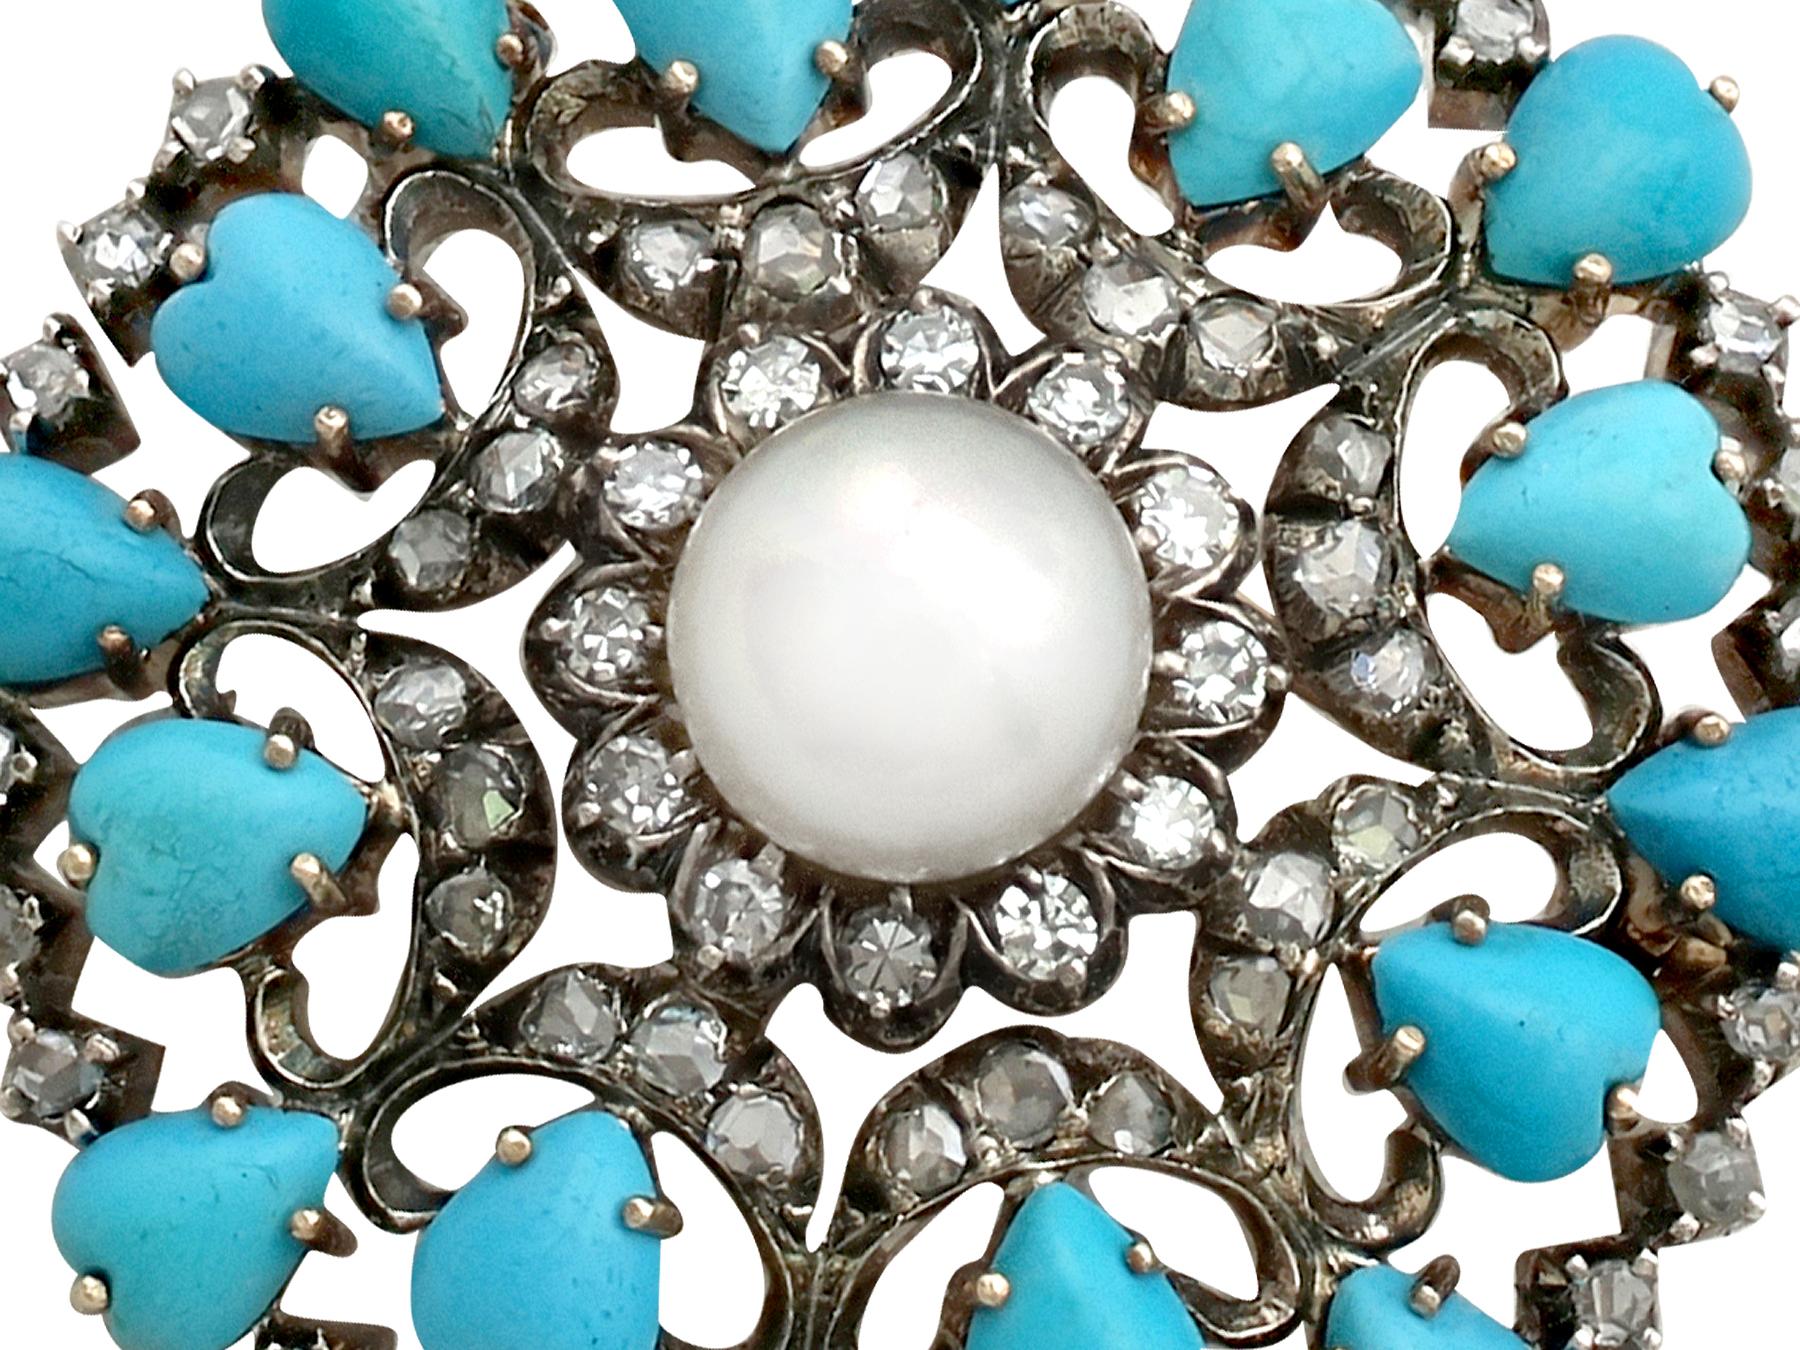 An exceptional Victorian 1.36 carat diamond, pearl and turquoise 18k yellow gold brooch; part of our antique jewelry/estate jewelry collections.

This impressive antique turquoise brooch has been crafted in 18k yellow gold with a silver